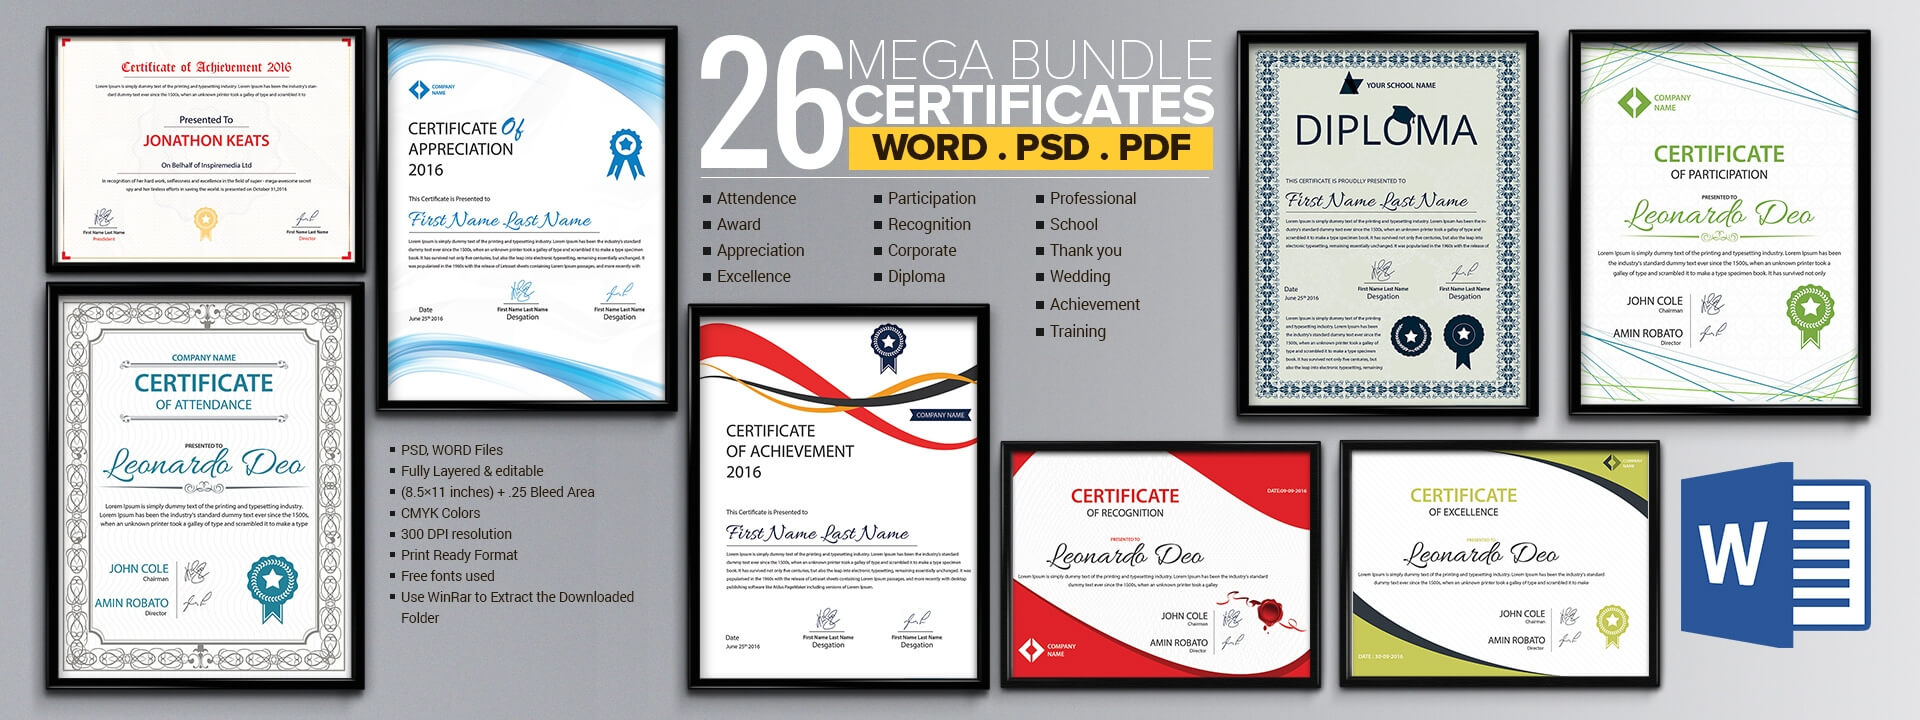 Word Certificate Template – 49+ Free Download Samples Regarding Downloadable Certificate Templates For Microsoft Word